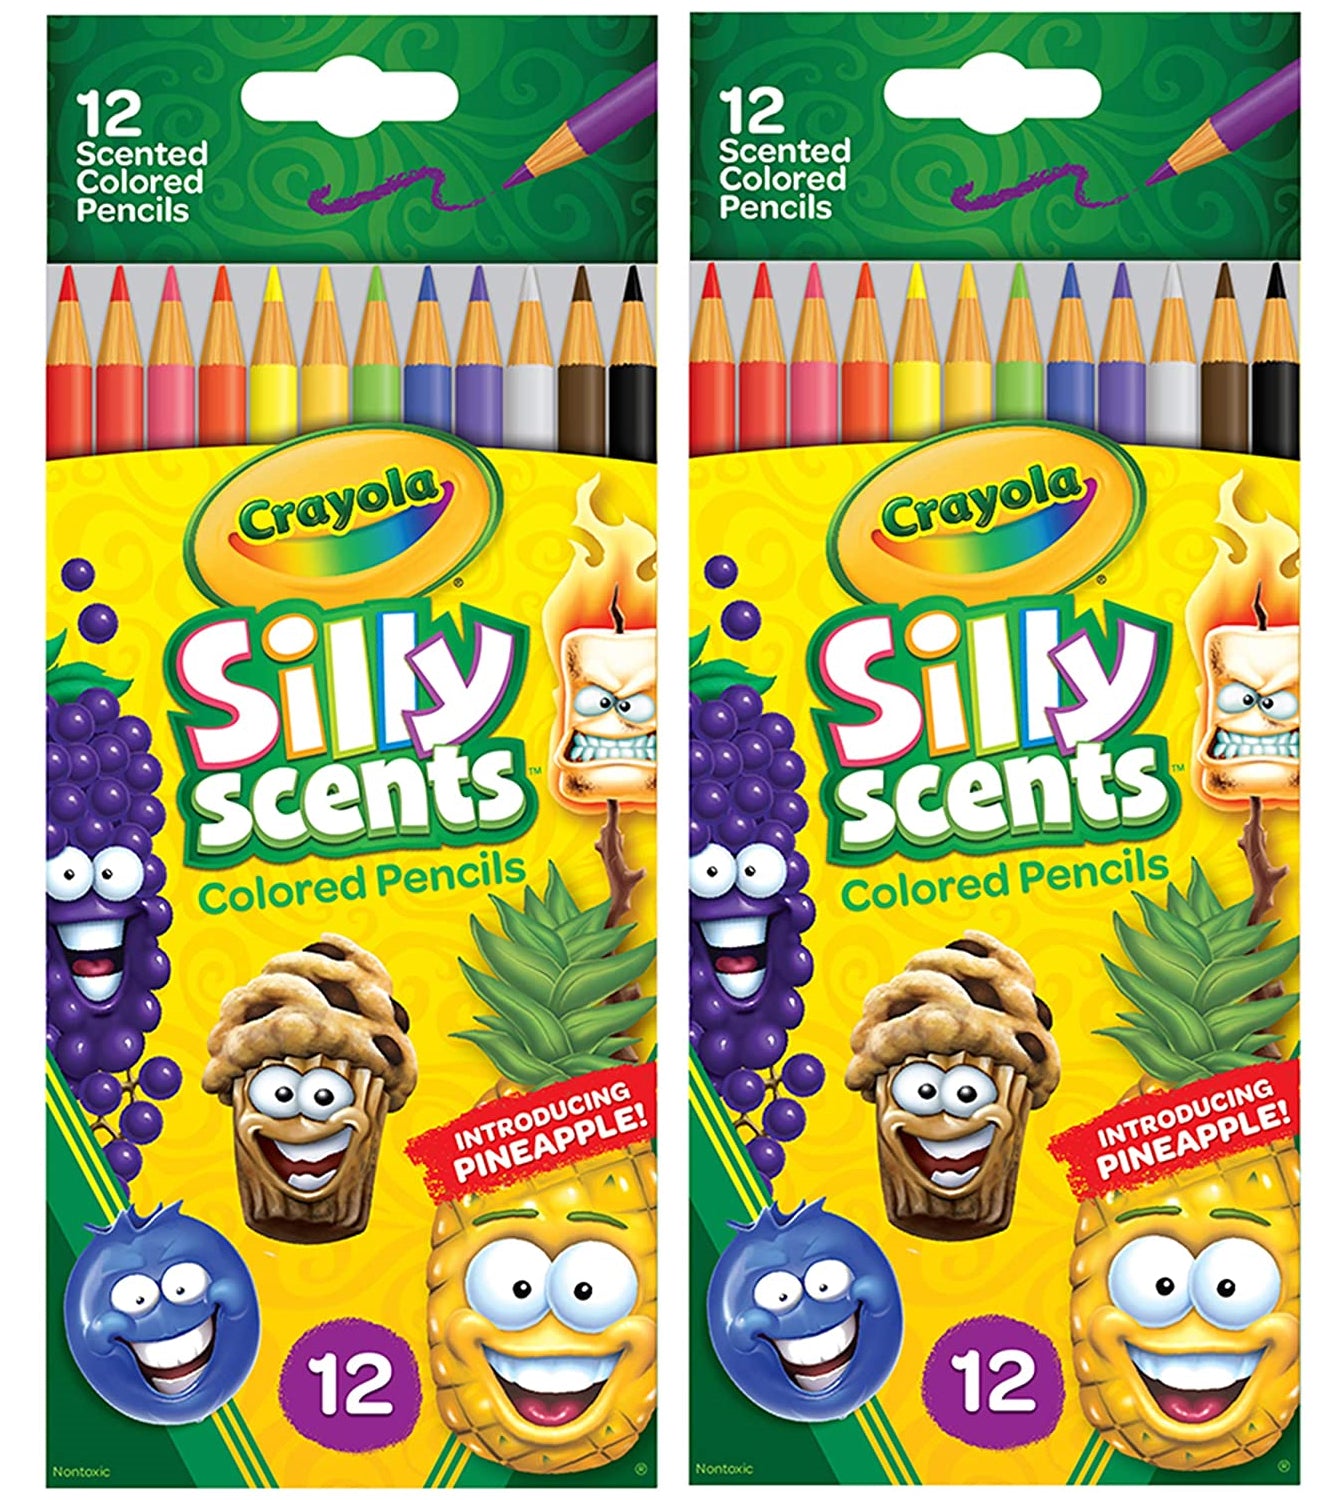 Crayola Silly Scents Scented Colored Pencils, Gift for Kids, 24-Count, Assorted - Pack of 2